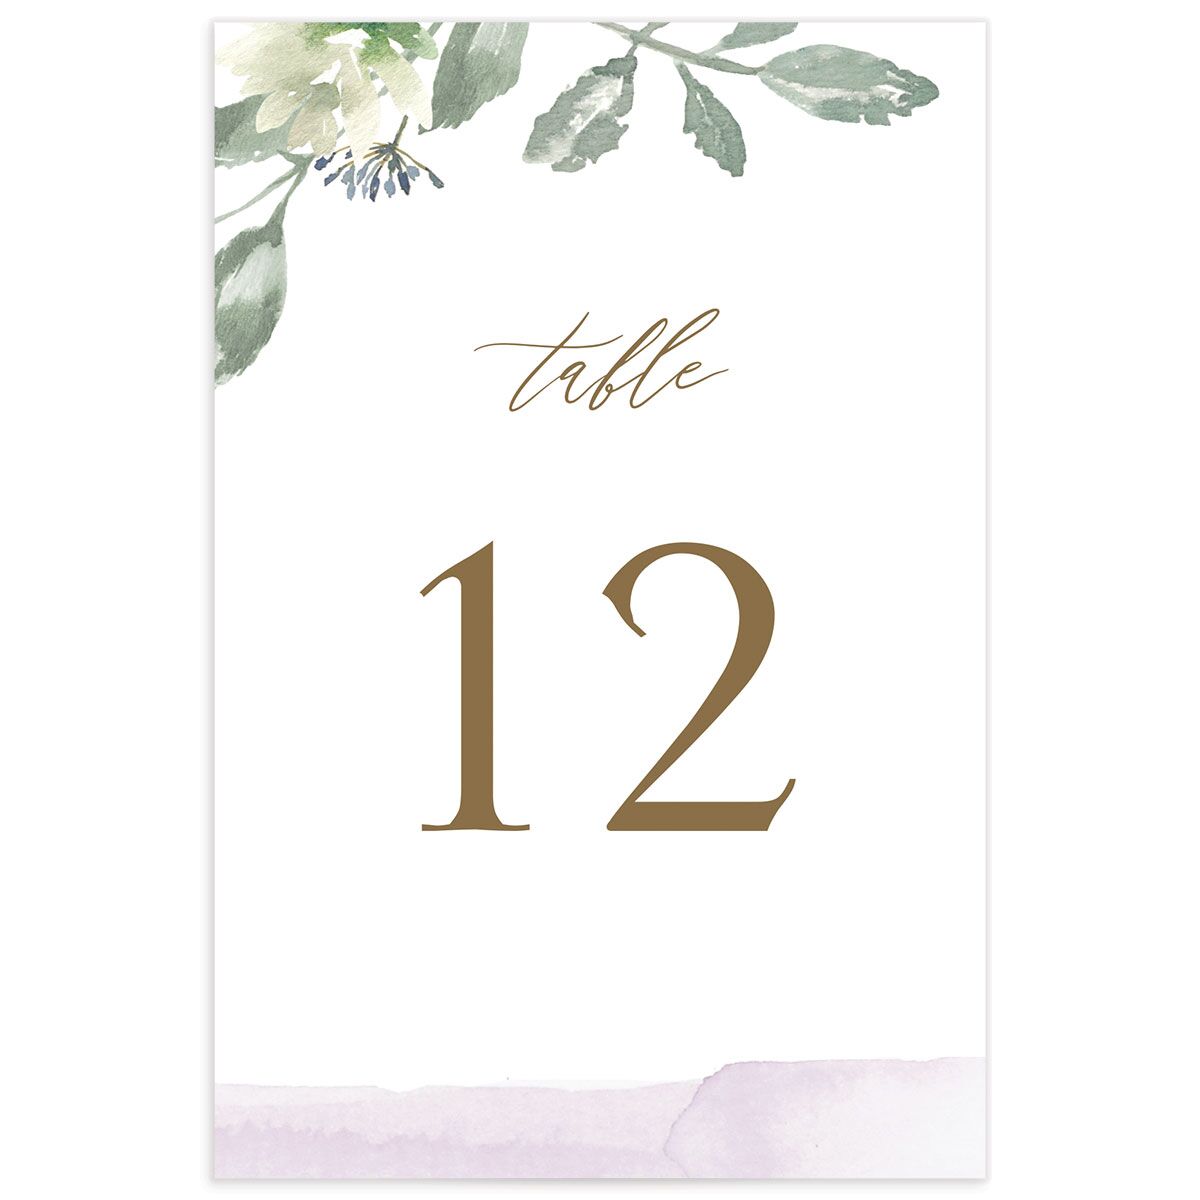 Watercolor Floral Table Numbers back in Lavender